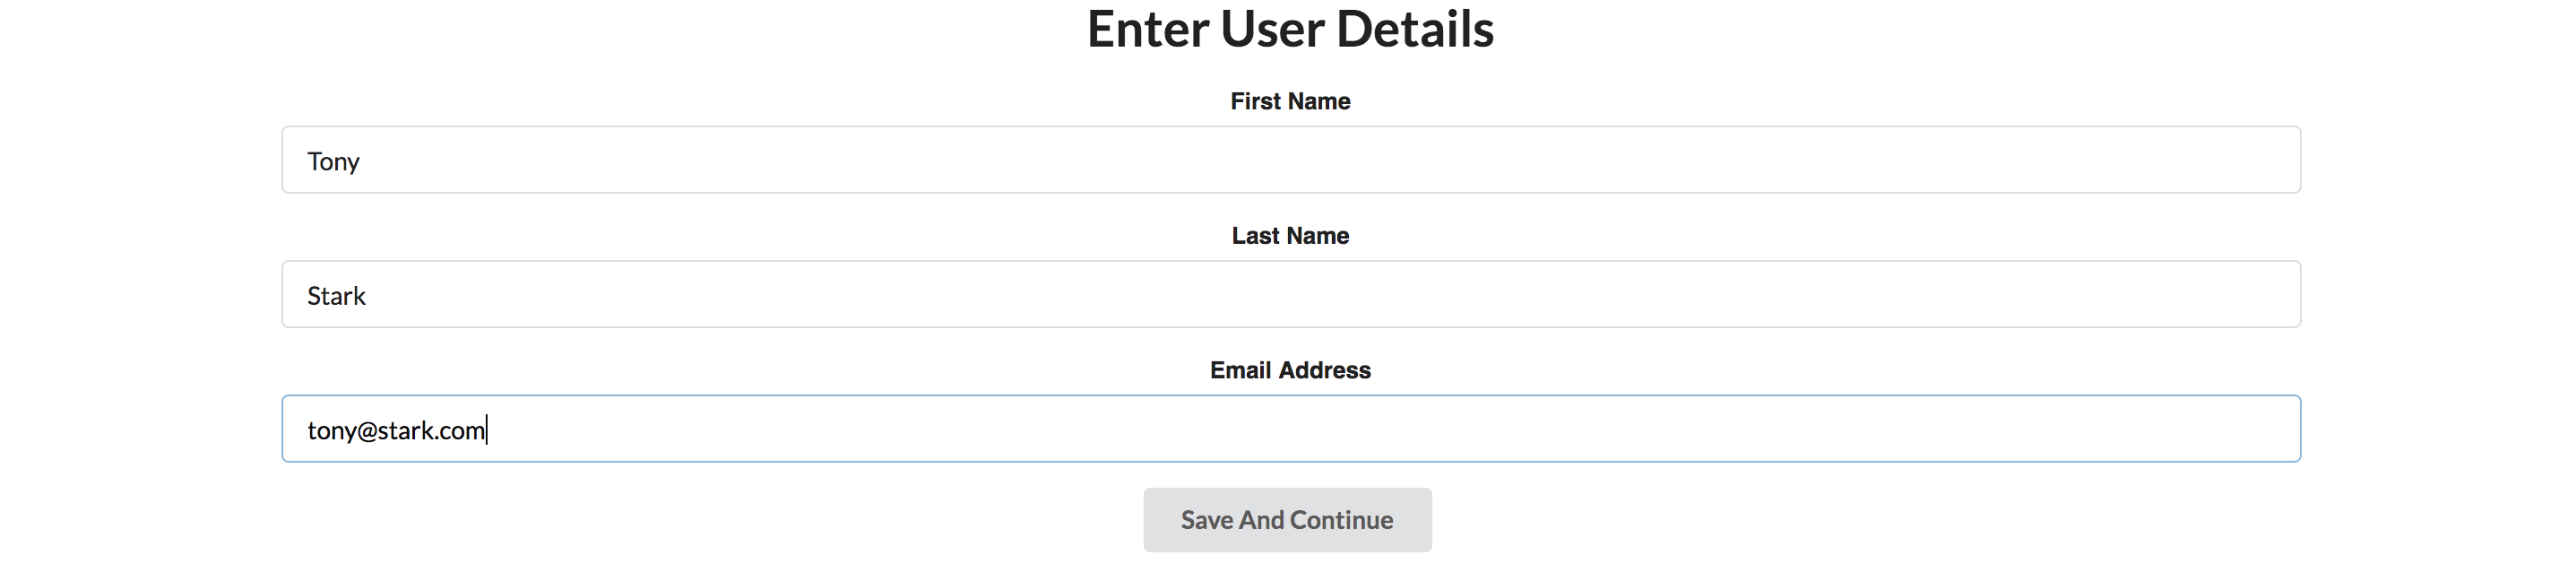 UserDetails Section